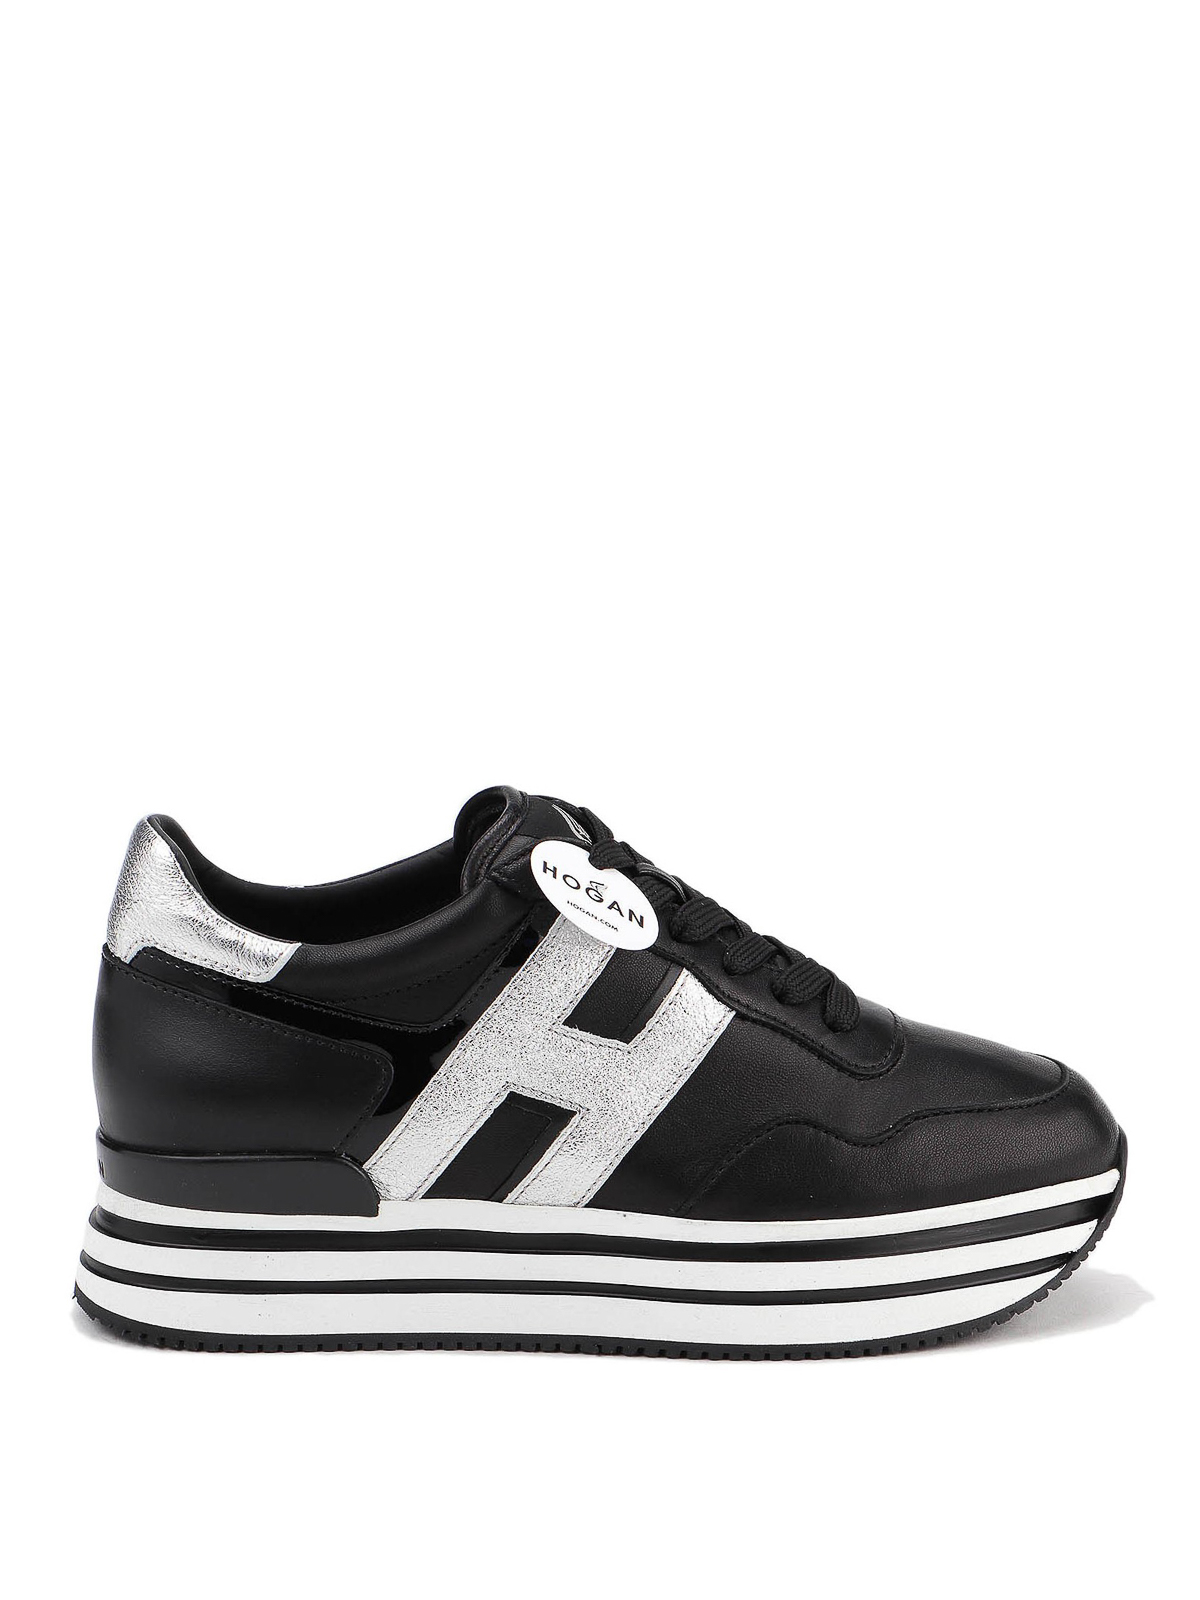 Trainers Hogan - Midi H222 sneakers with laminated inserts ...